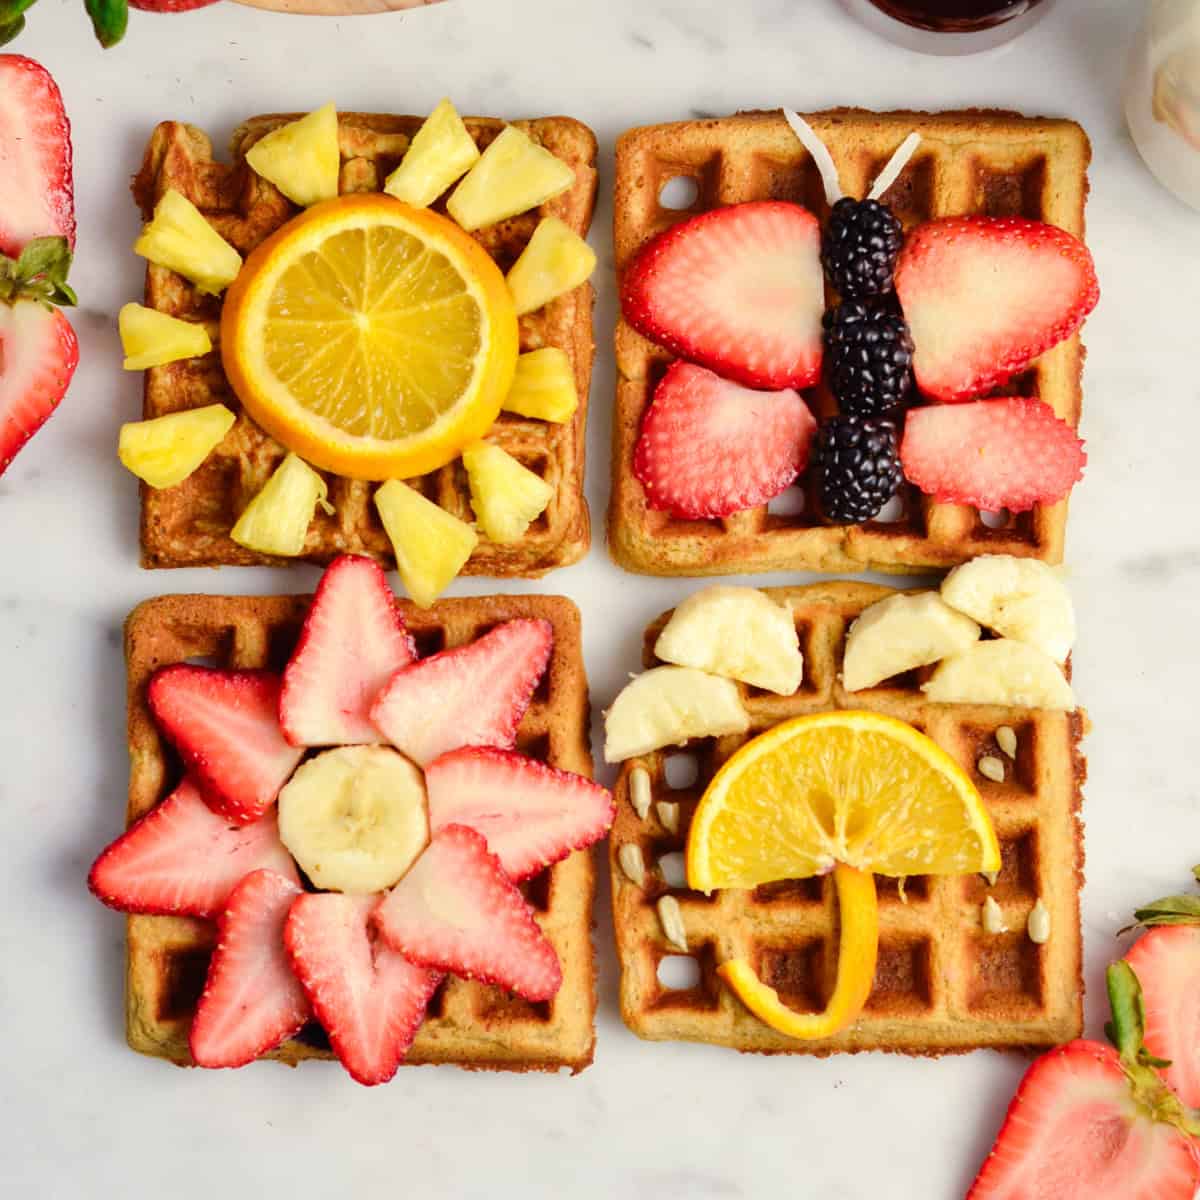 4 Peanut Butter Banana Oatmeal Waffles with cute scenes on them made out of fruit